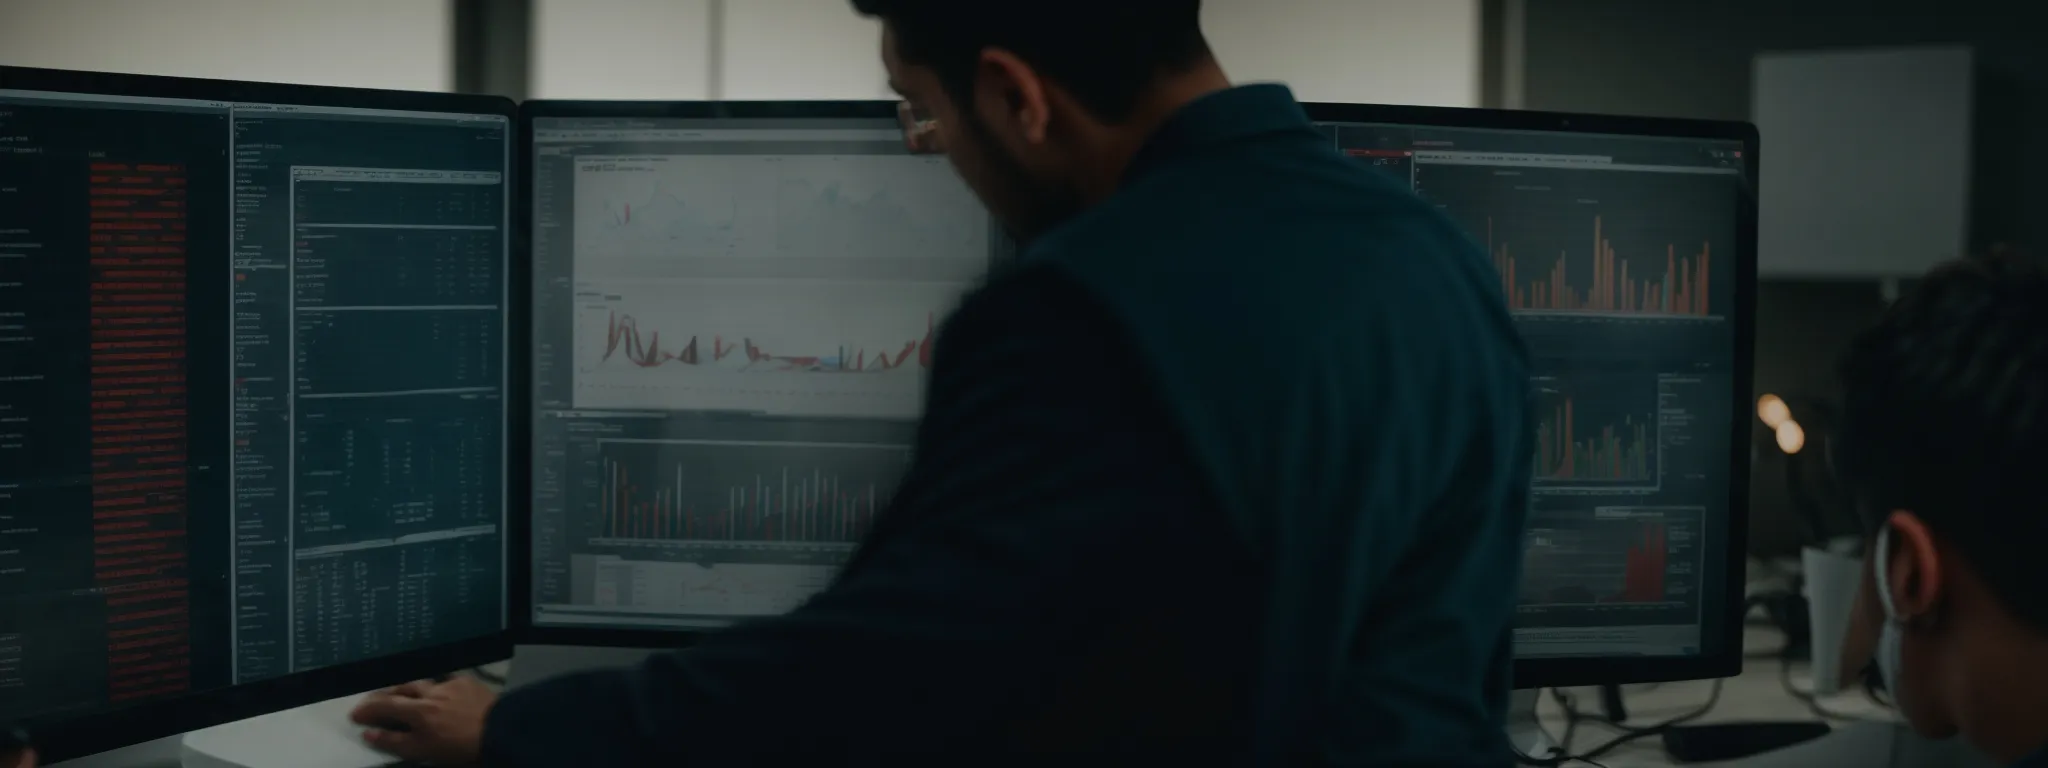 a marketer examining a complex analytics dashboard on a computer screen displaying search engine rankings.